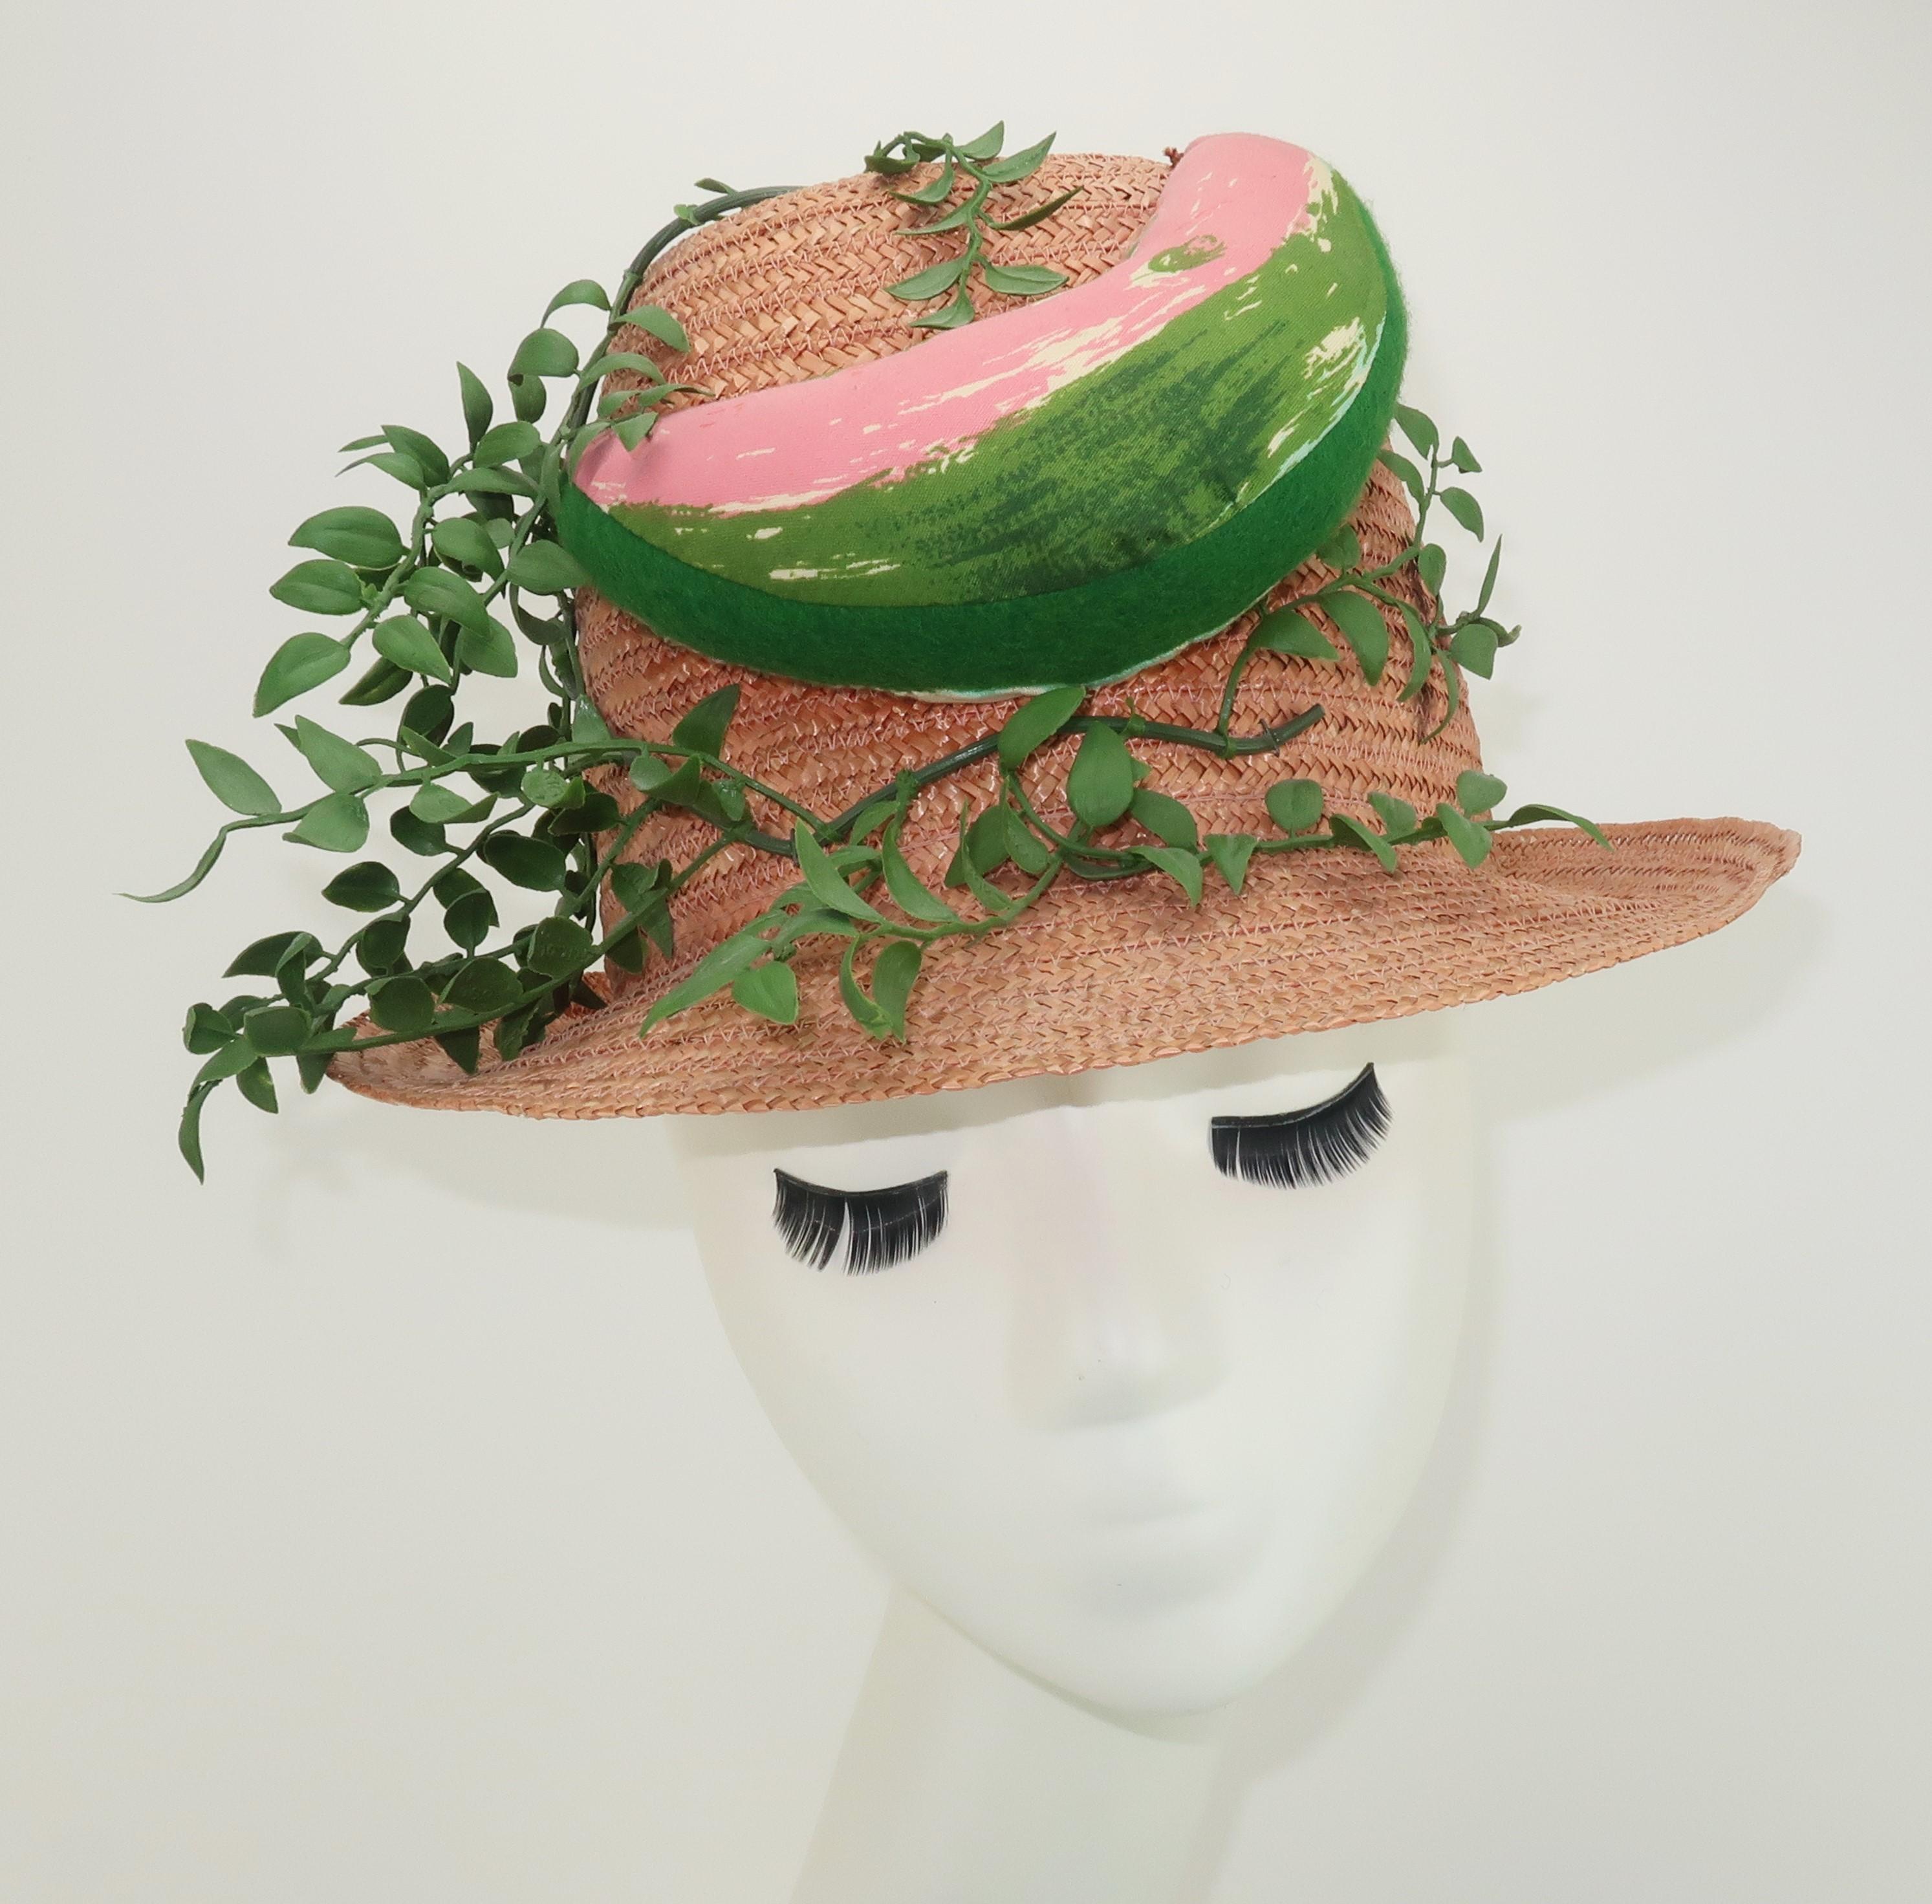 1960's novelty straw hat by Margie Webb Designs, California Accessories.  The fleshtone pink straw body is made in Italy and has a trilby style silhouette whimsically decorated with a stuffed fabric watermelon slice and faux green foliage.  A fun